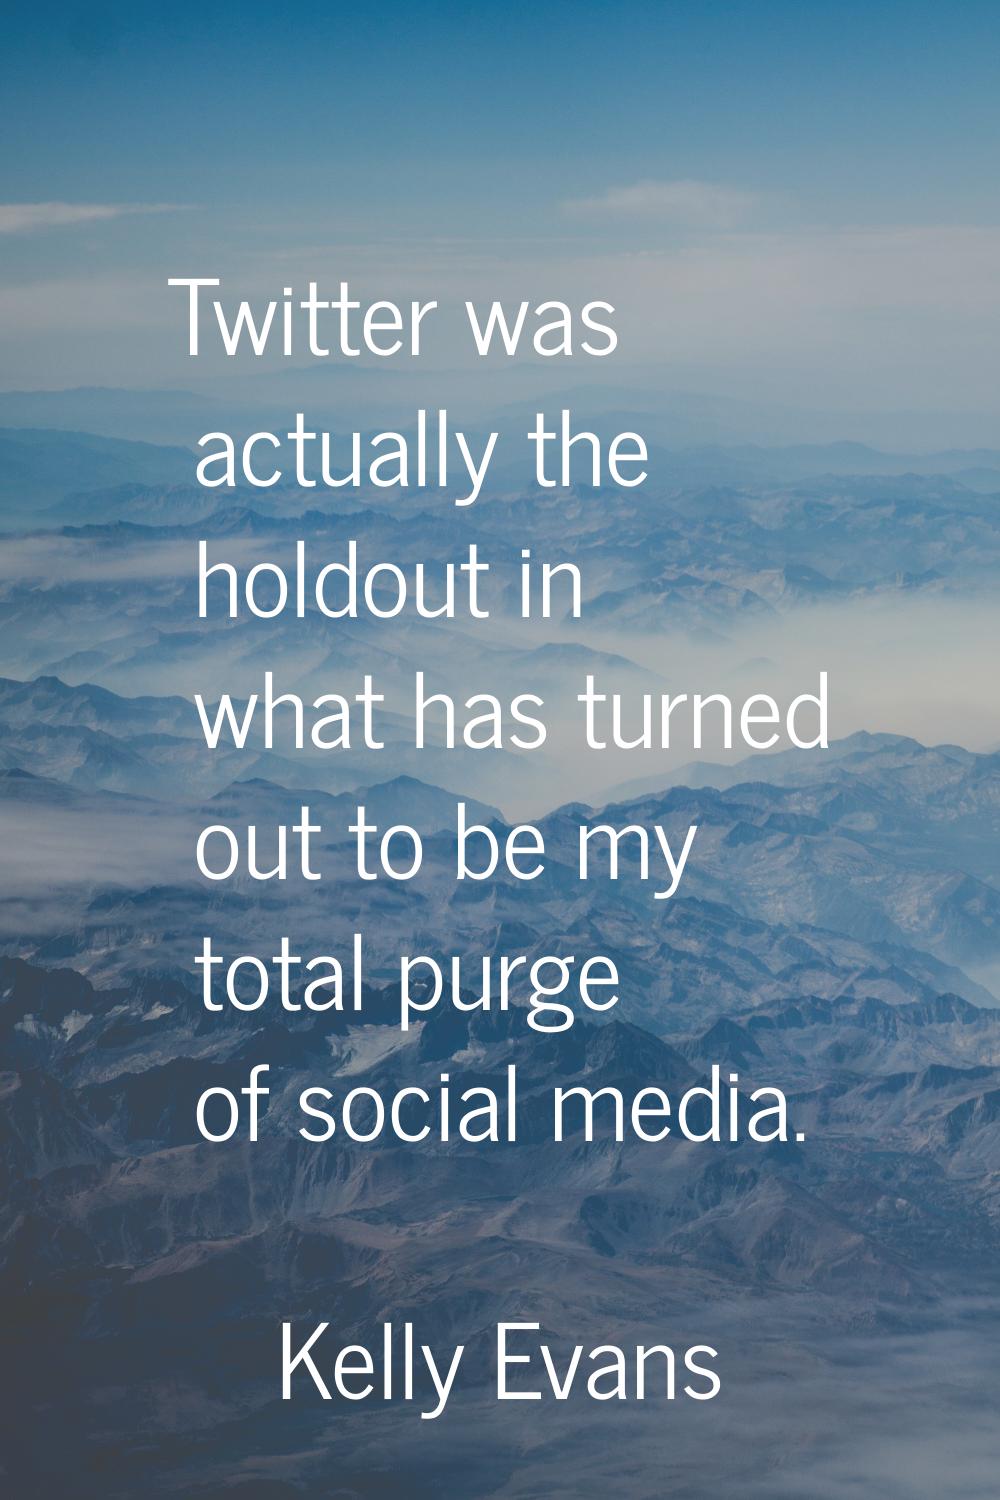 Twitter was actually the holdout in what has turned out to be my total purge of social media.